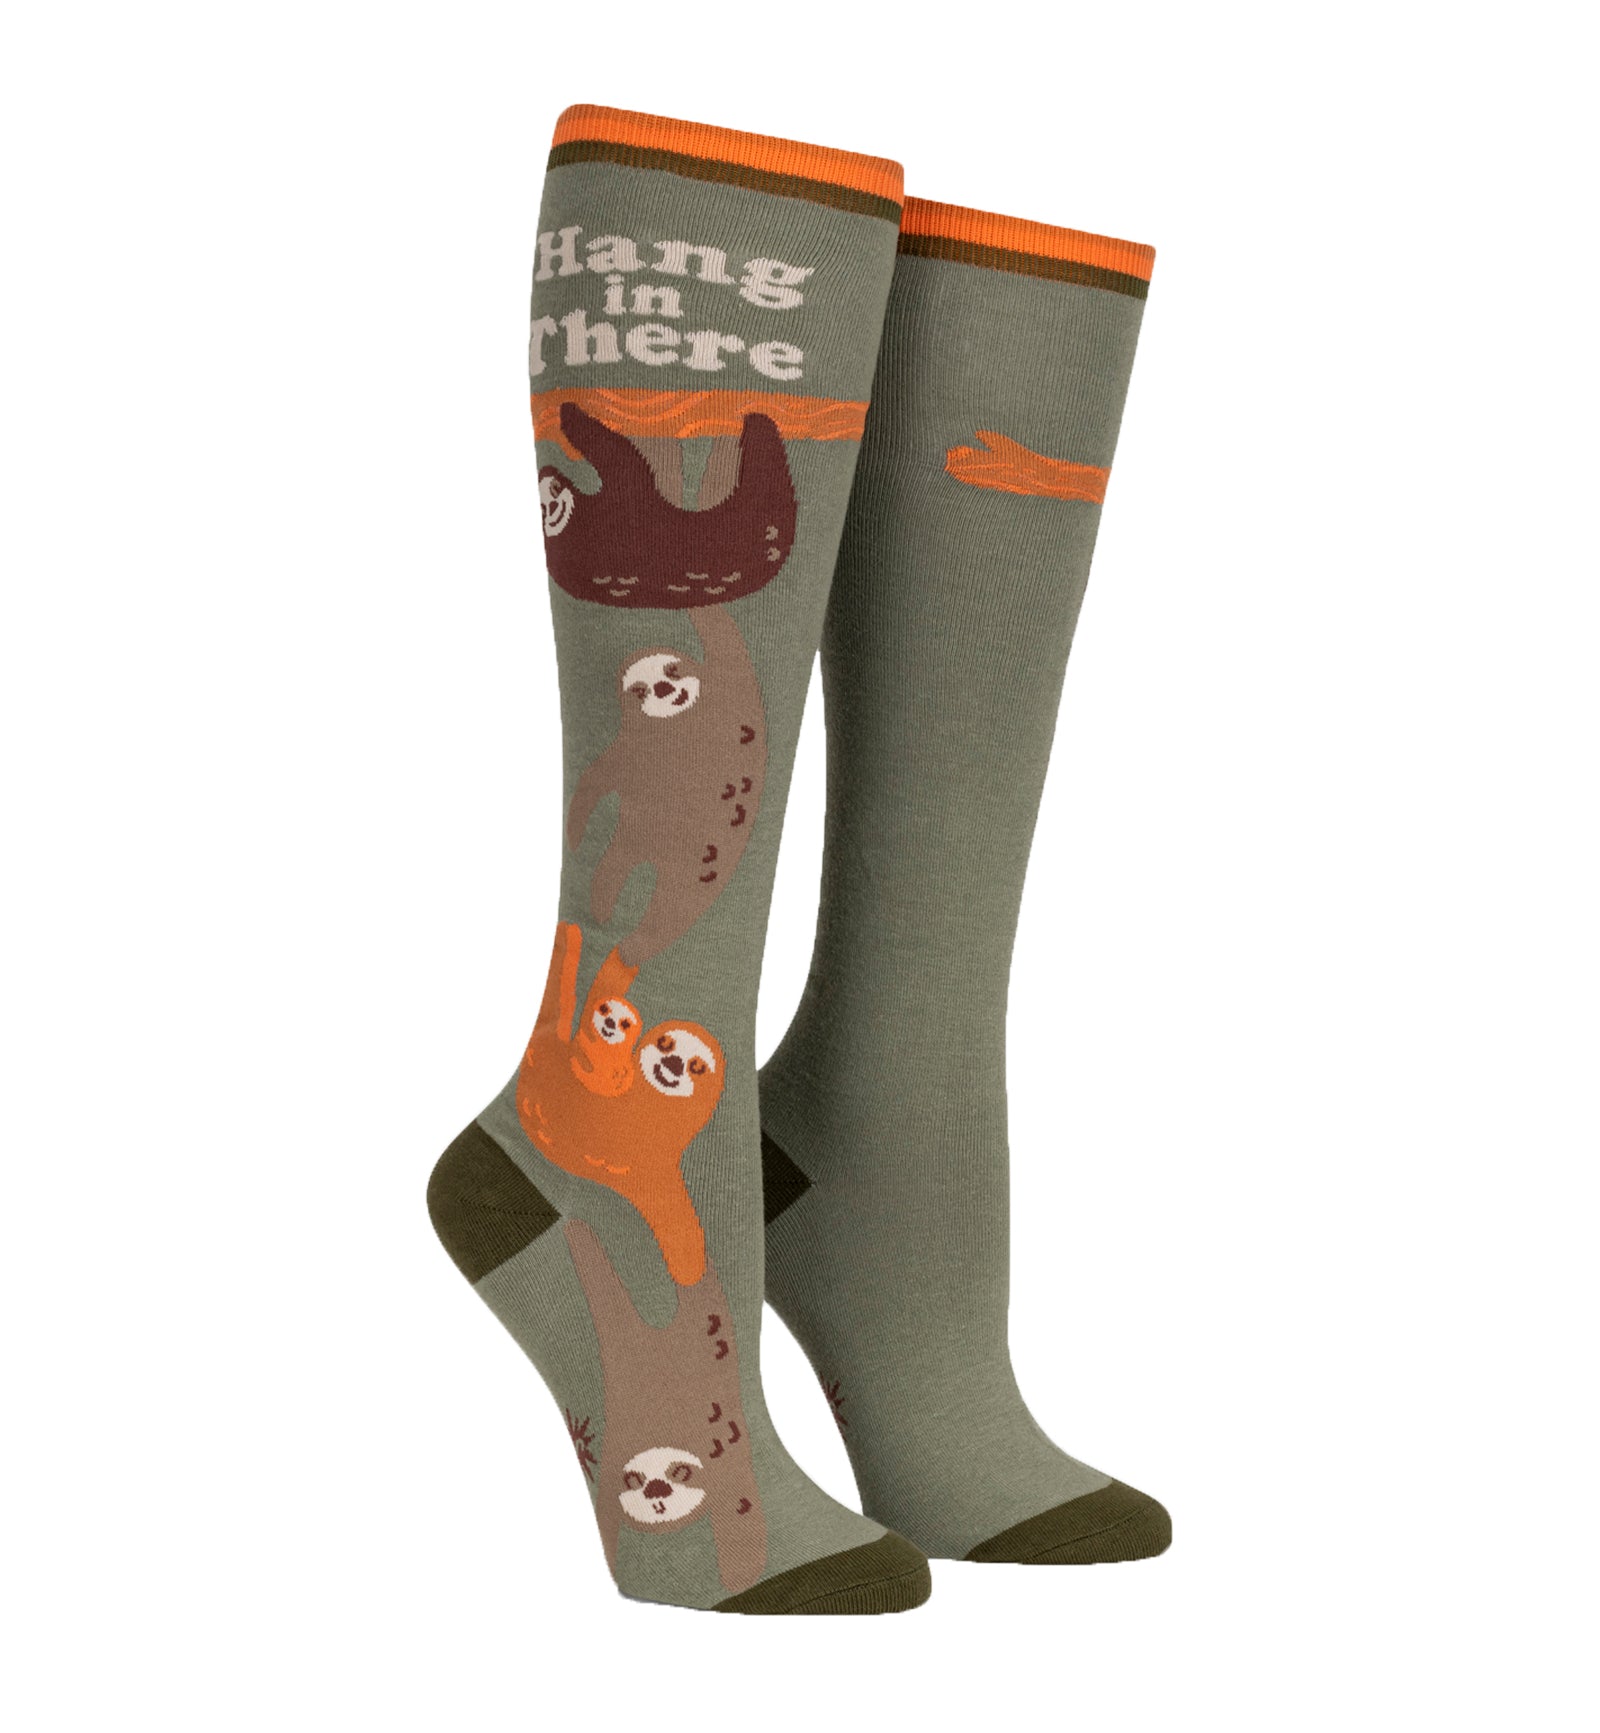 SOCK it to me Unisex Knee High Socks (F0629),Hang in There - Hang in There,One Size